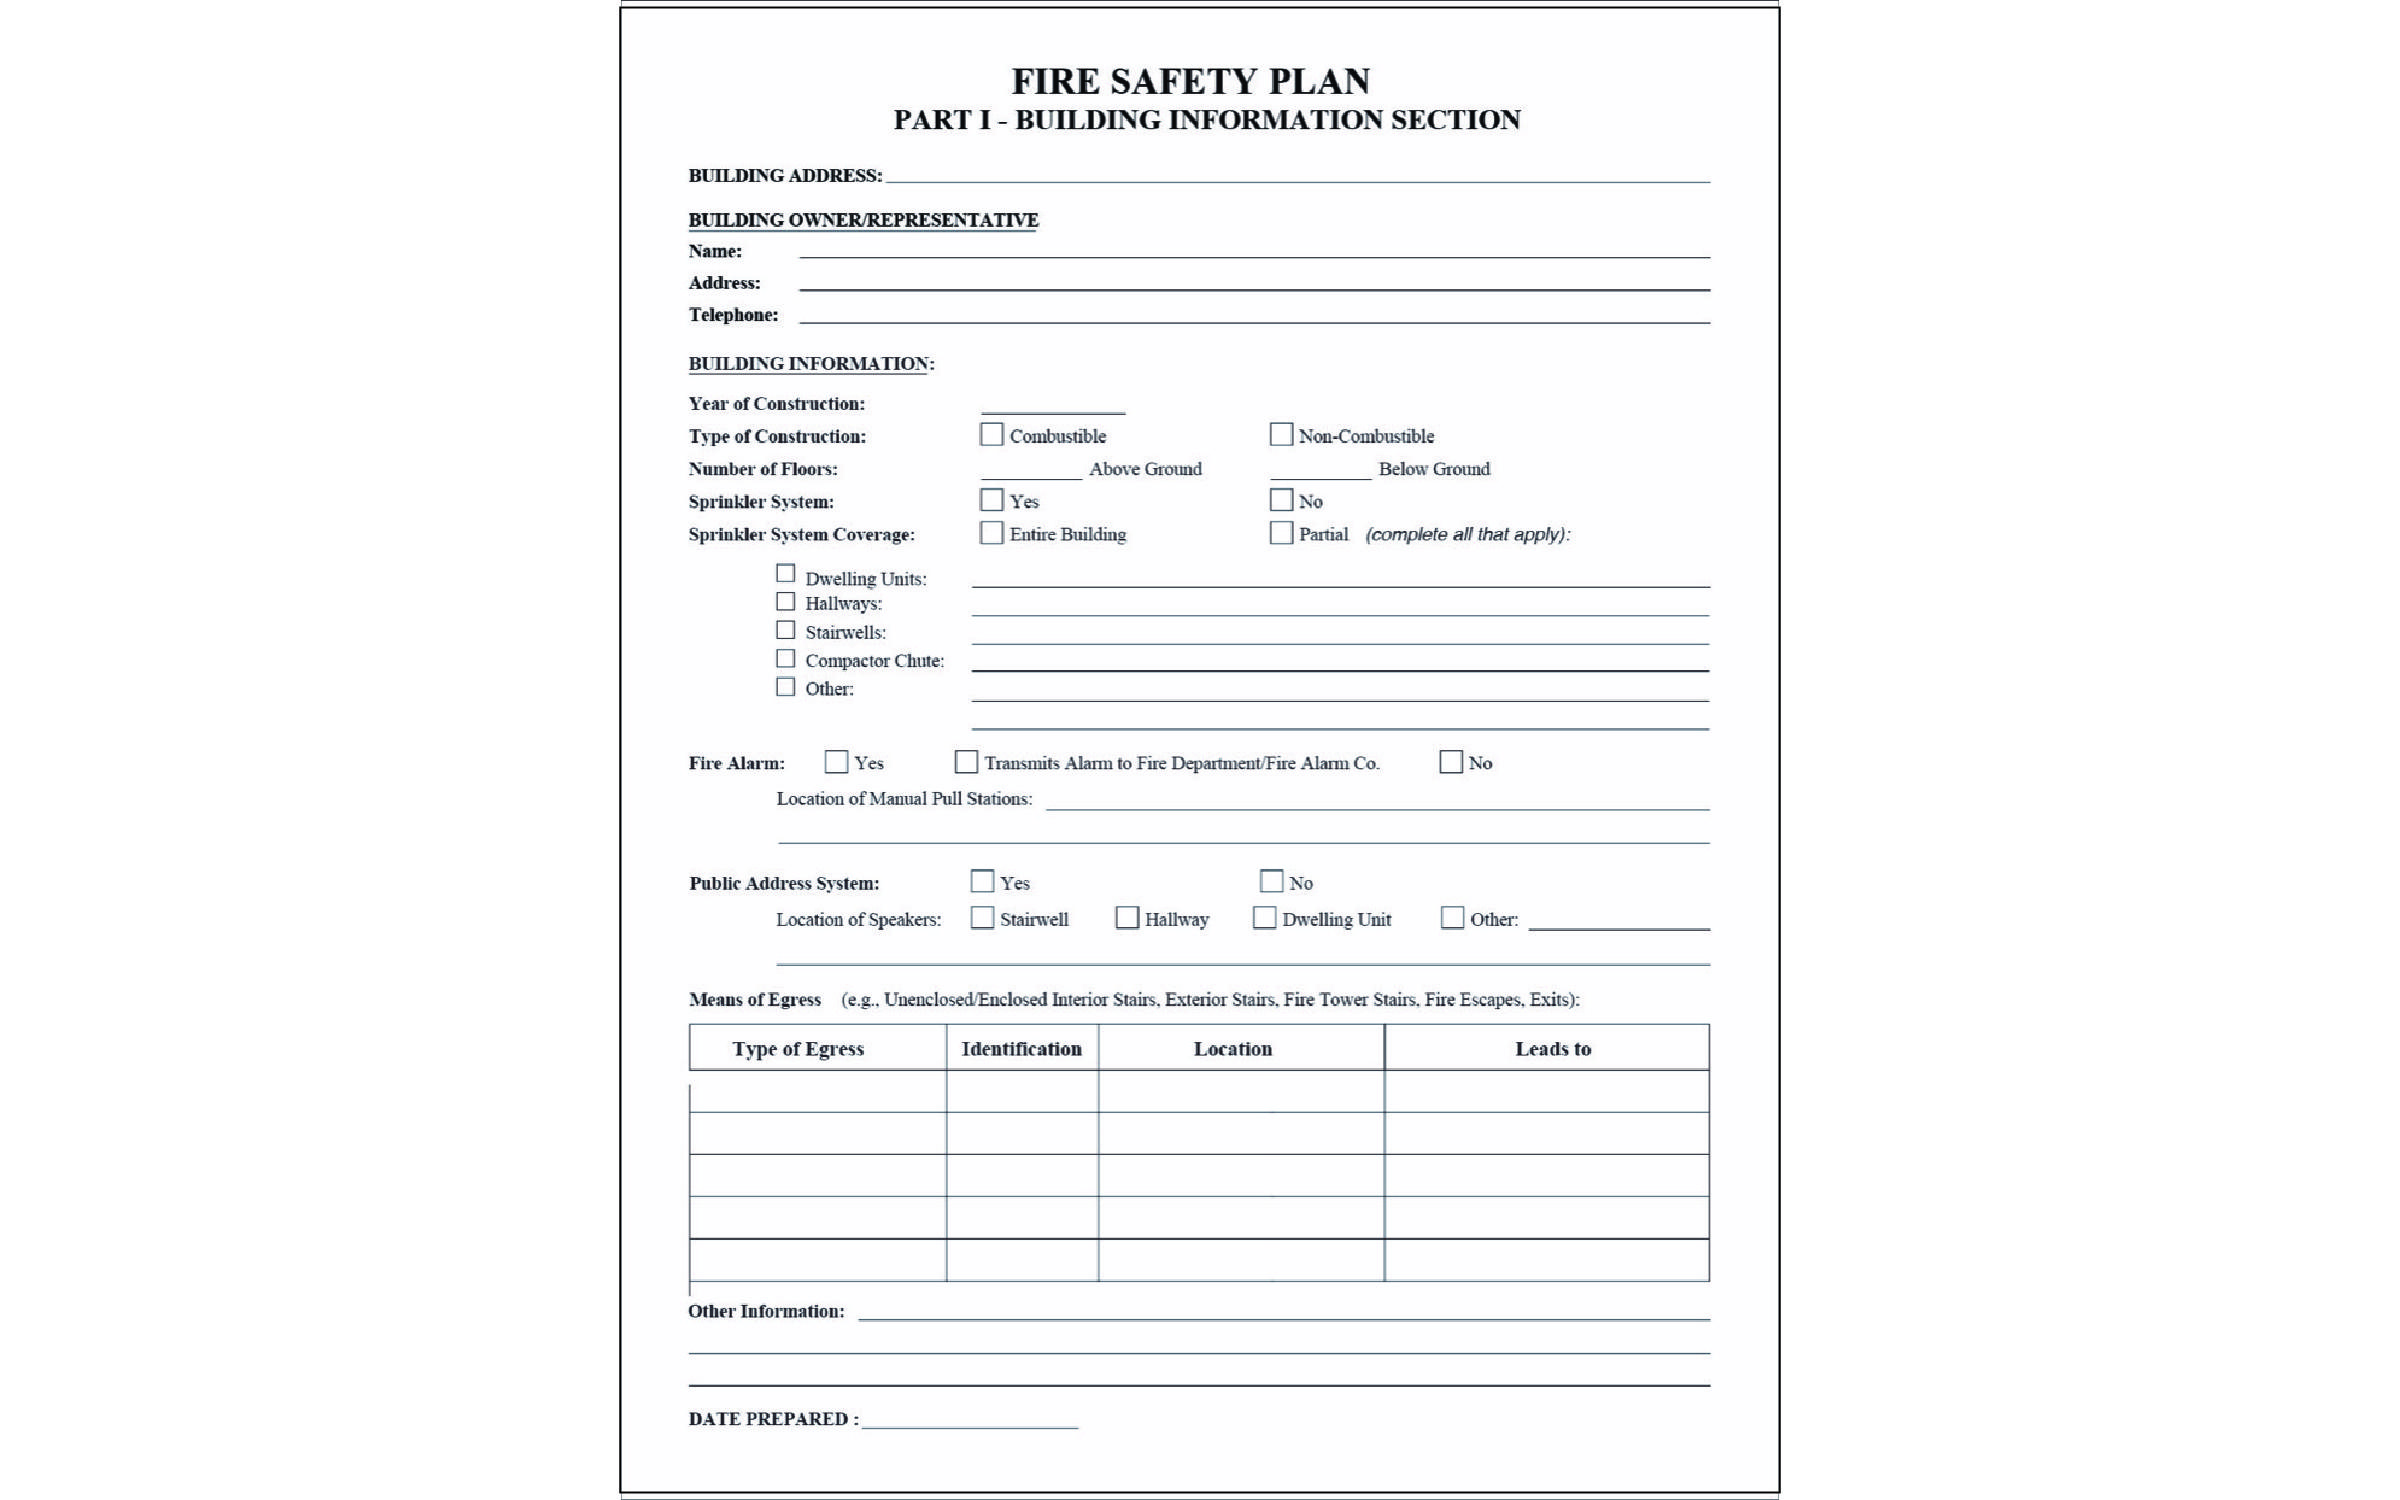 Sign 7) 8.5" x 11" - Fire Safety Plan